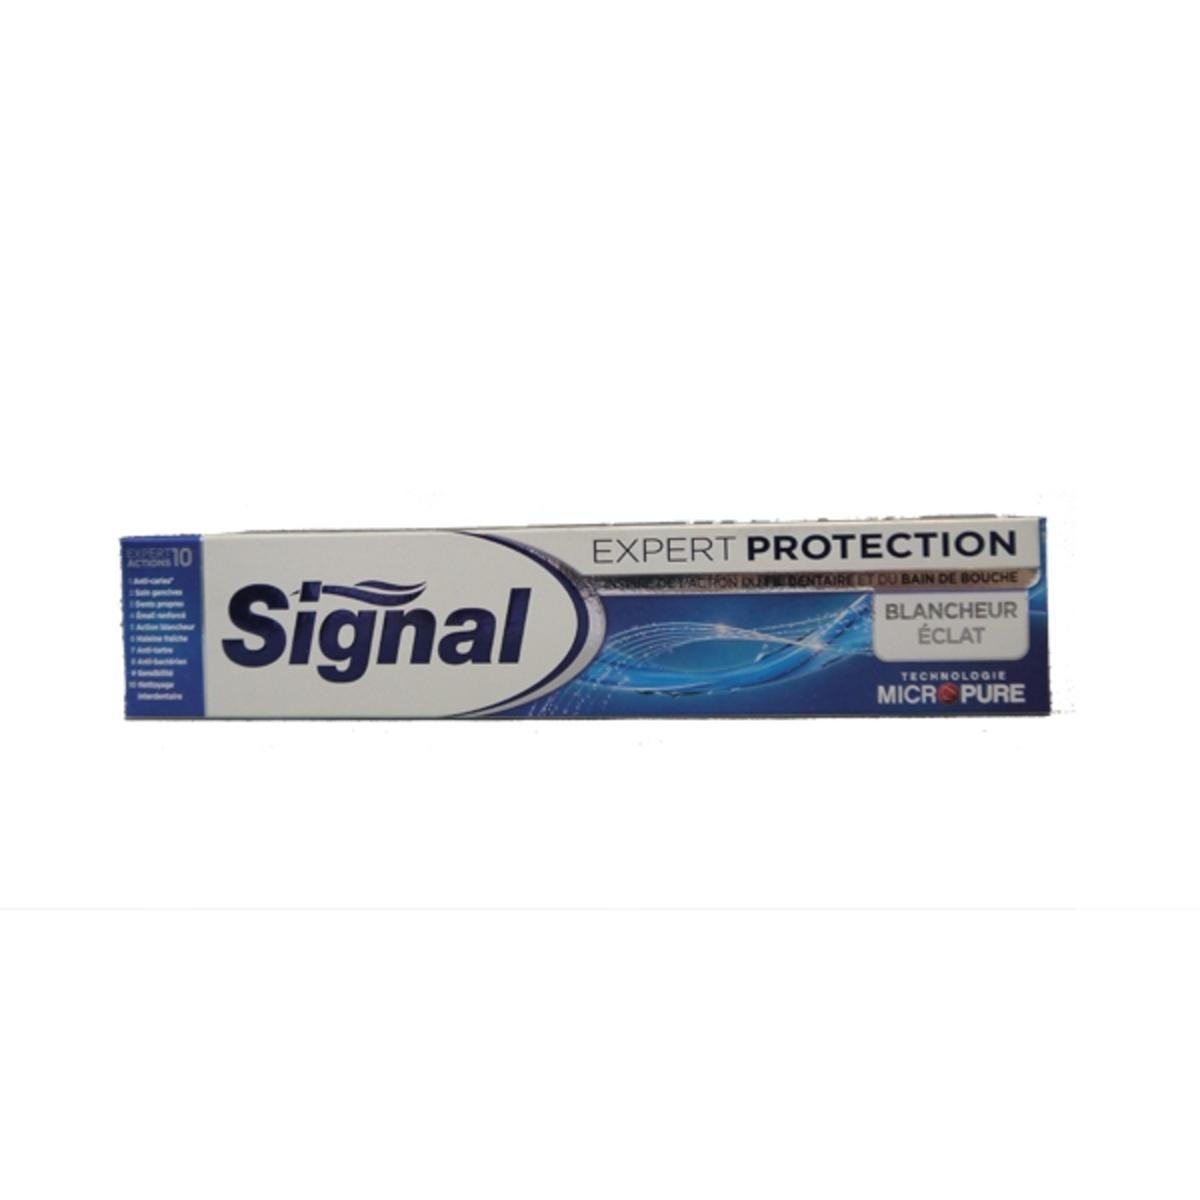 Dentifrice Expert Protection - 75 ml - SIGNAL